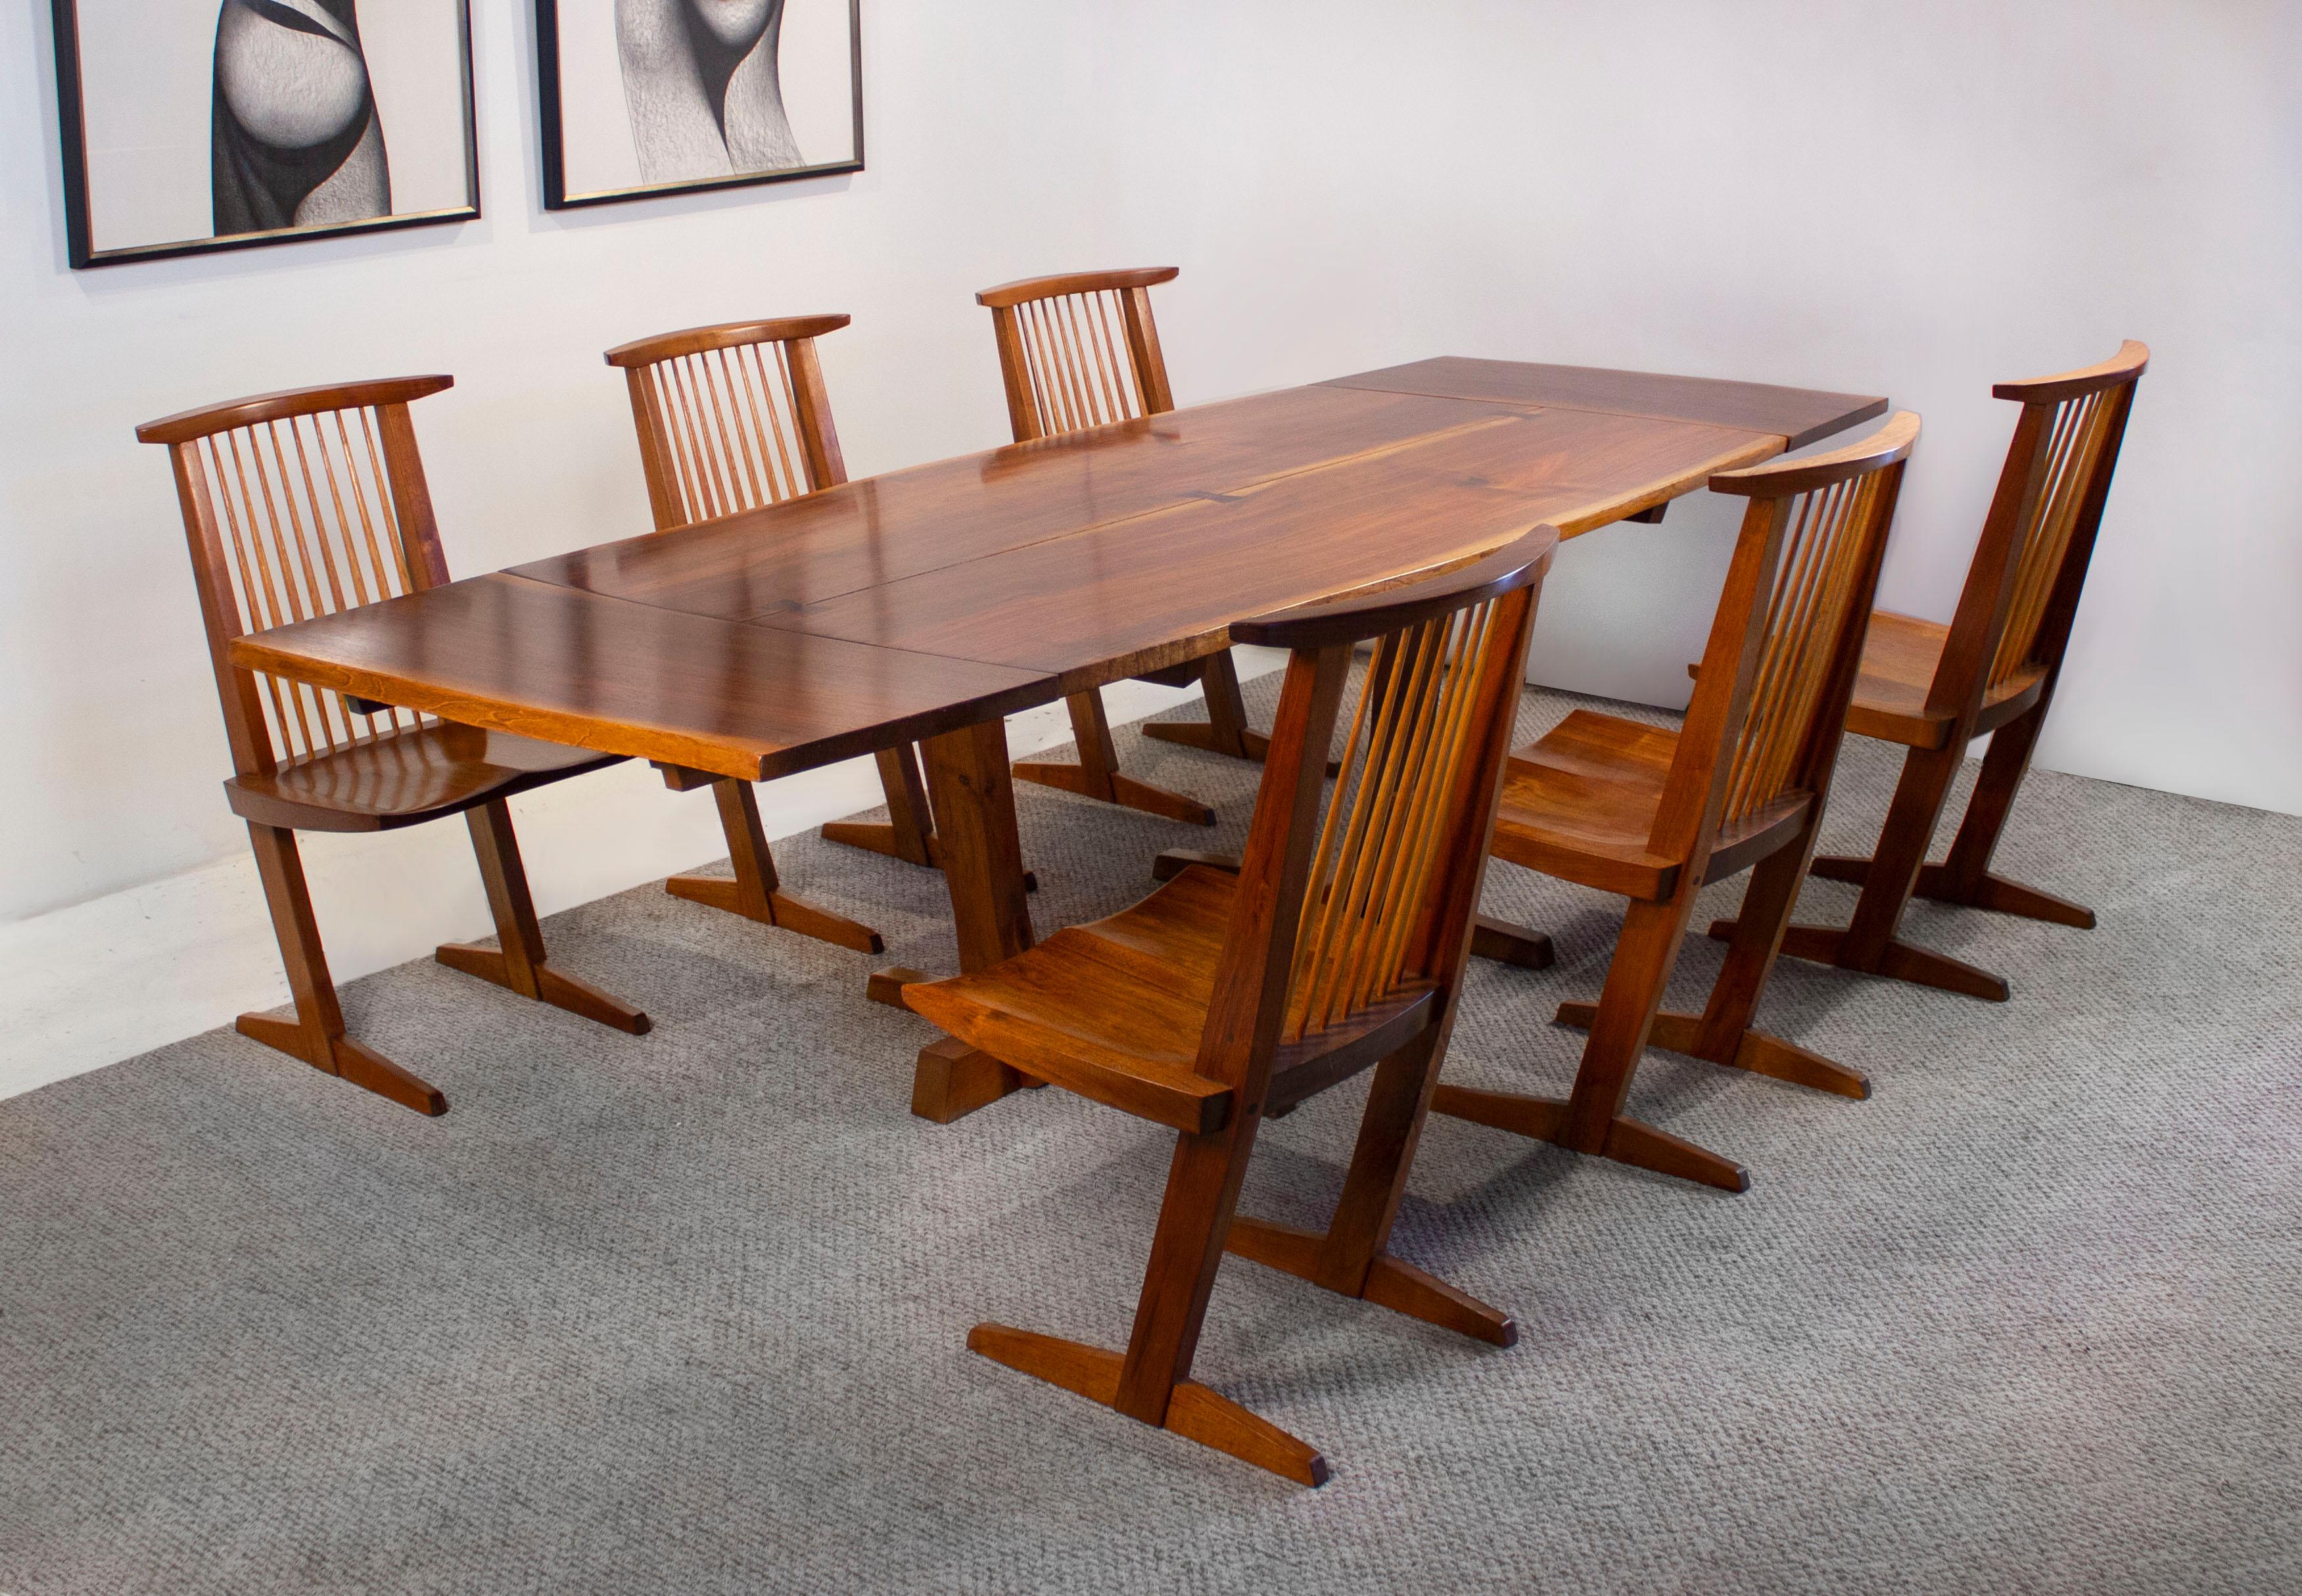 This early George Nakashima Dining set was custom ordered from the Nakashima Studio in 1963 and has been in the original owner's possession for almost 60 years. It was well cared for and is ready for another half of a century of use. 

The table